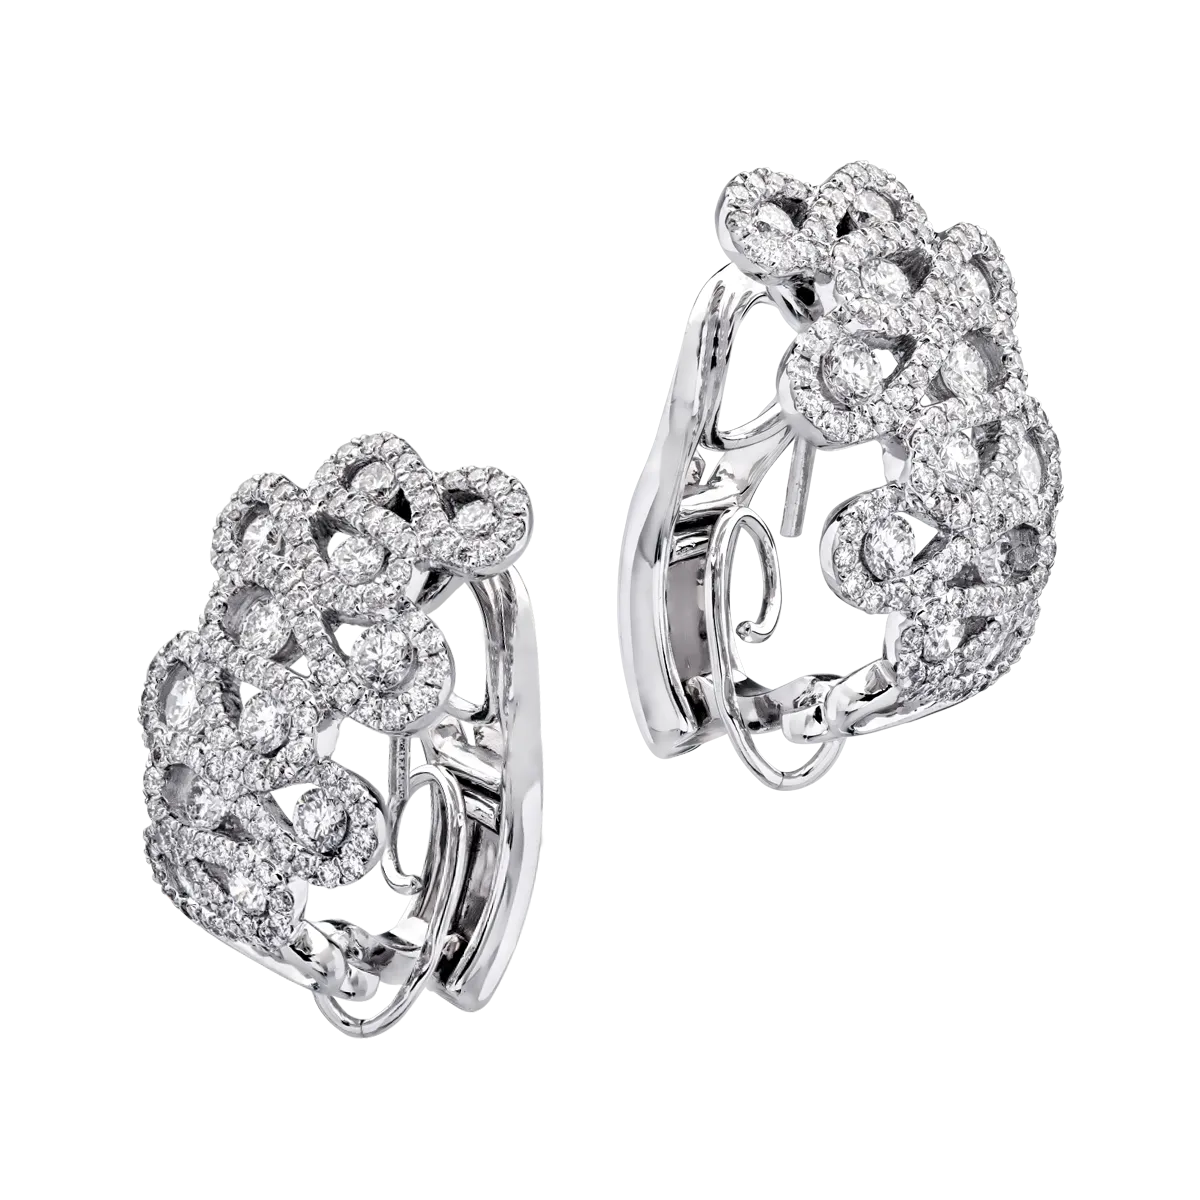 18K white gold earrings with 2.18ct diamonds